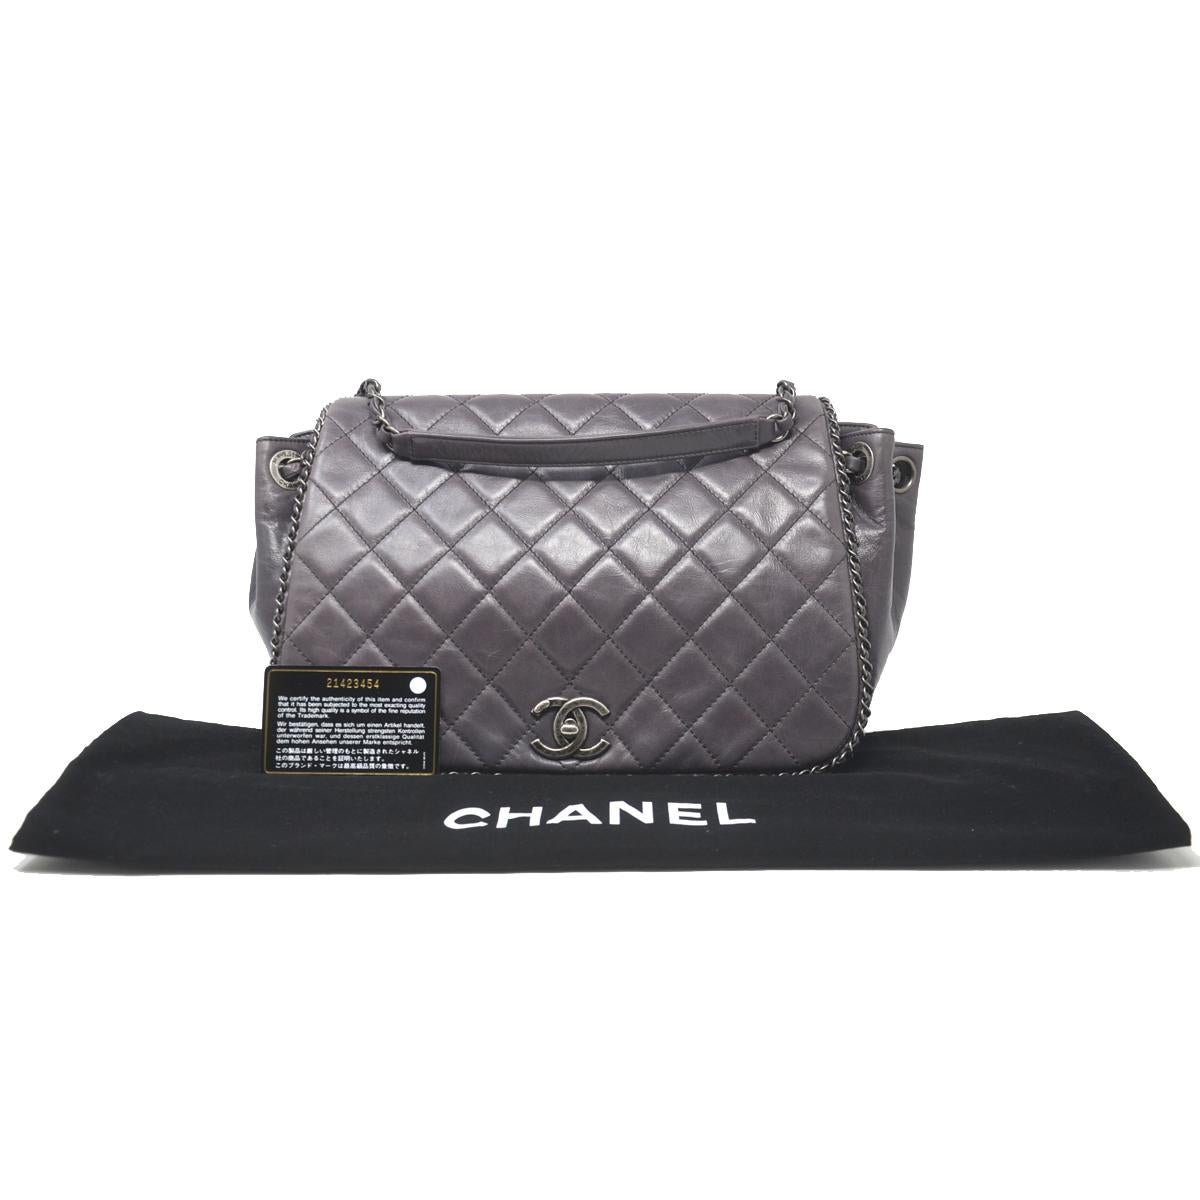 Chanel Chain Around Accordian Purple Quilted Leather Shoulder Bag 7